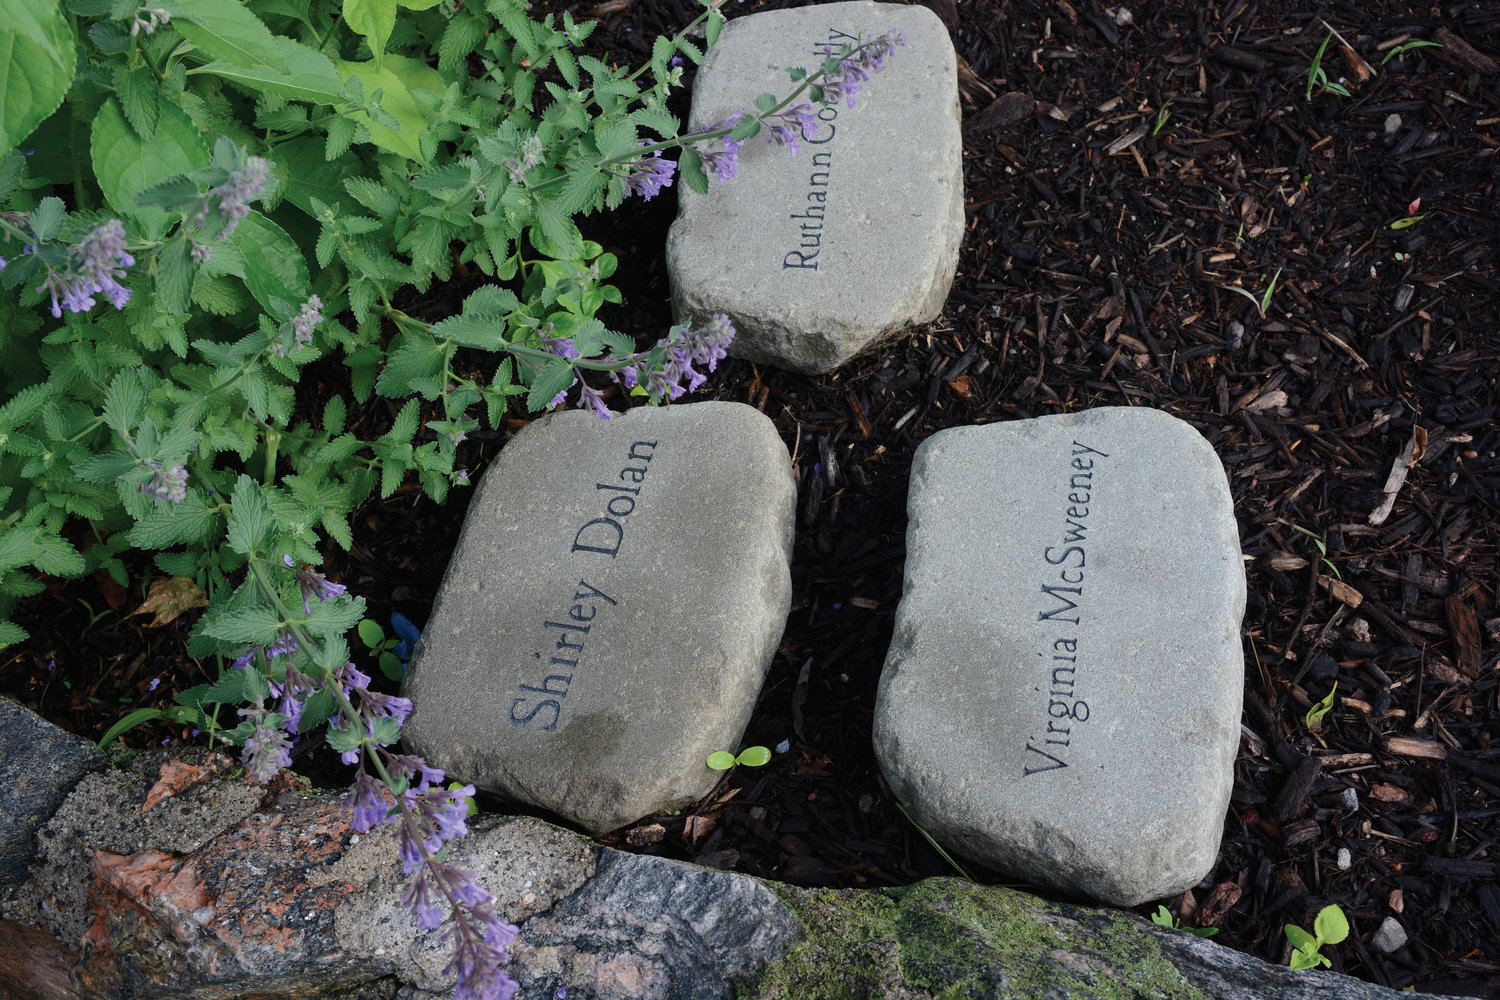 One of the shrine’s stone markers is dedicated to the memory of Shirley Jean Ratcliffe Dolan, Cardinal Dolan’s mother, who passed away March 12 at age 93.